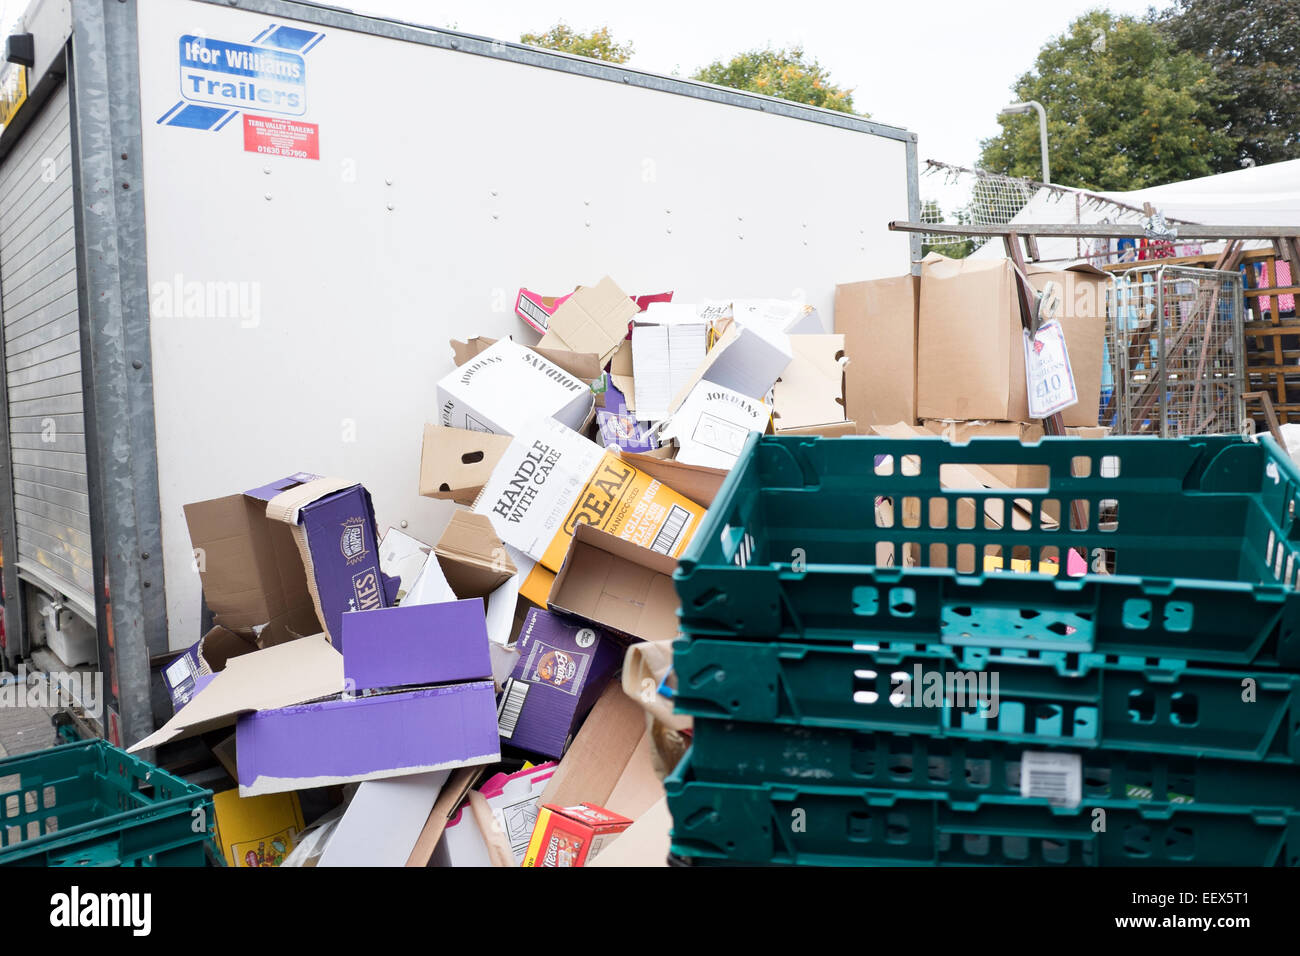 Market Traders Empty Cardboard Boxes Rubbish Piled Stock Photo